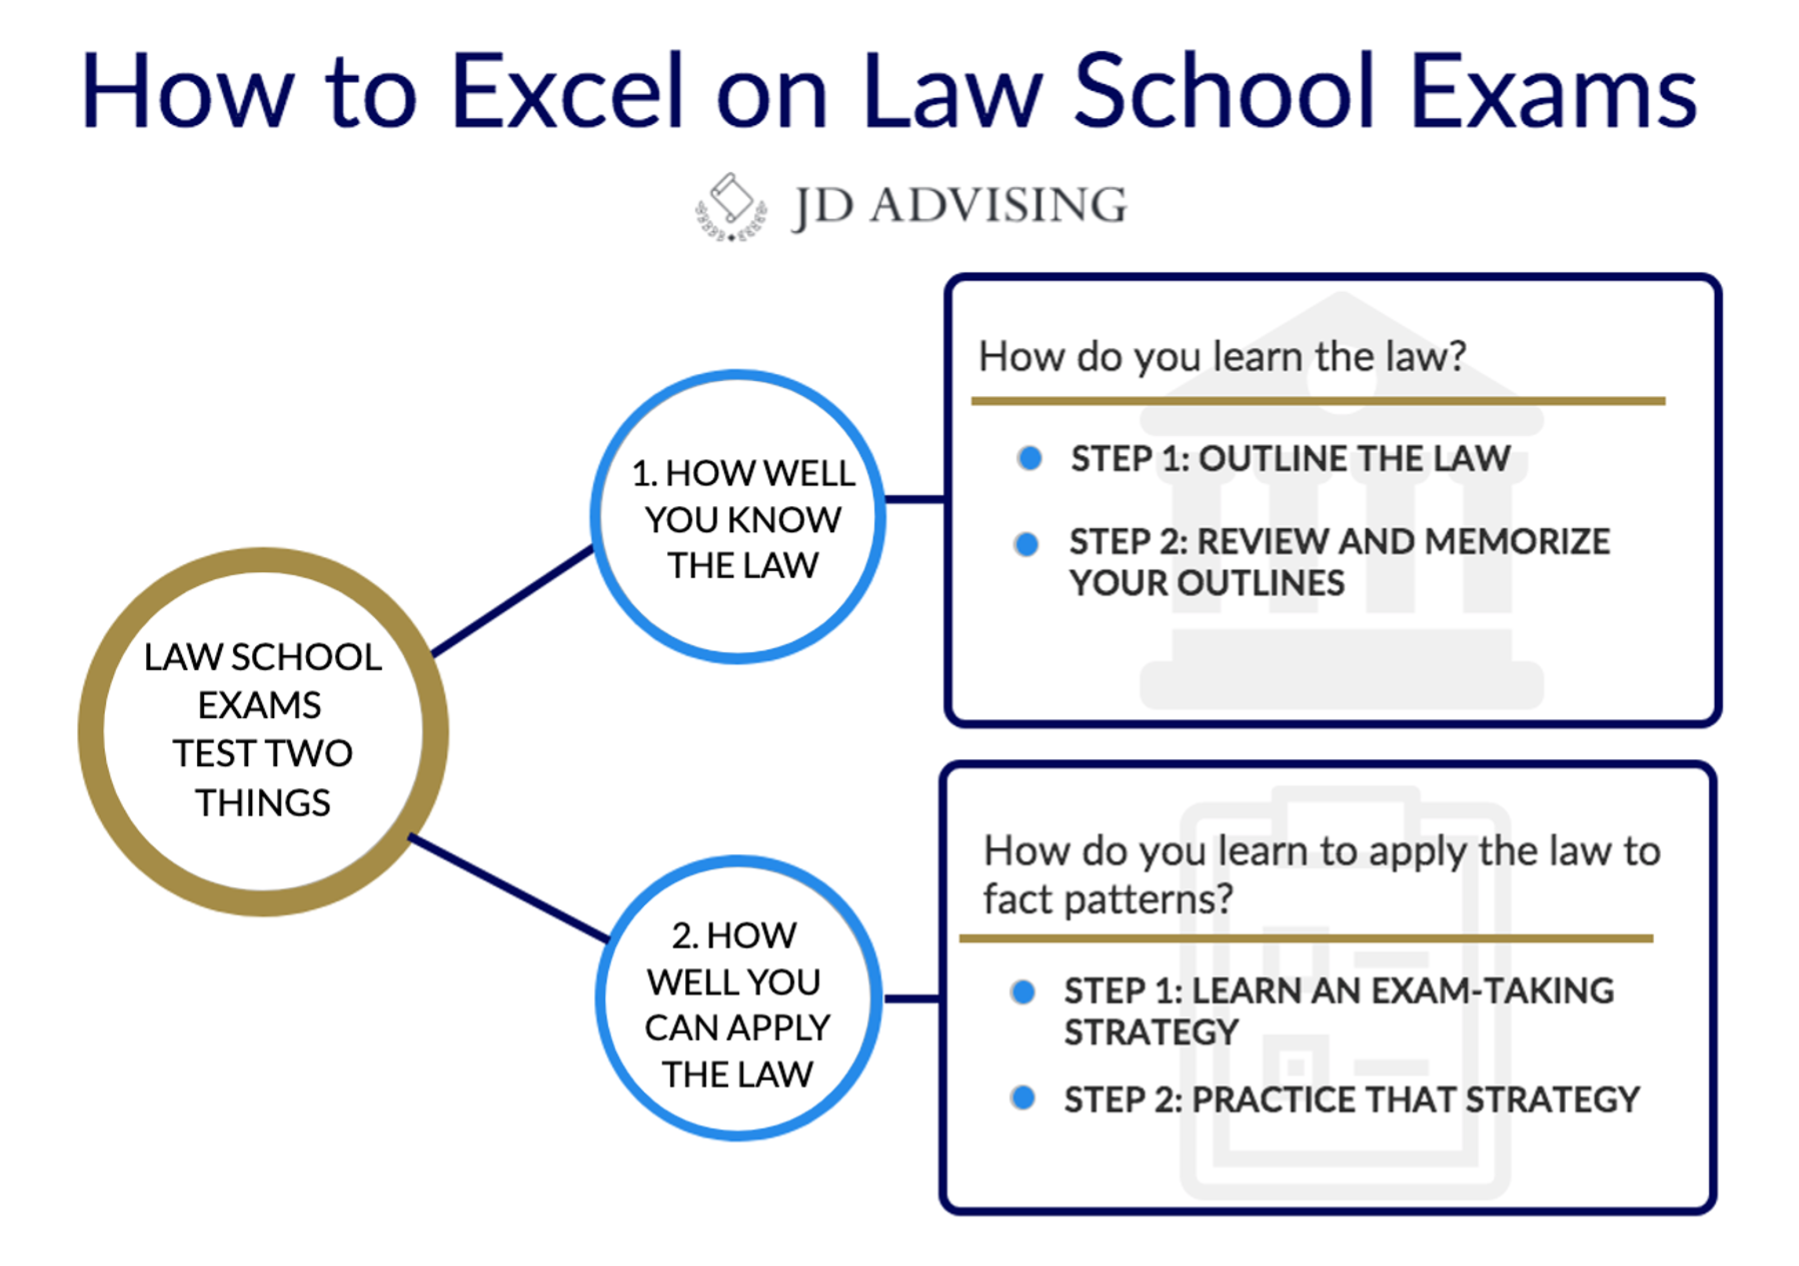 How to excel on law school exams